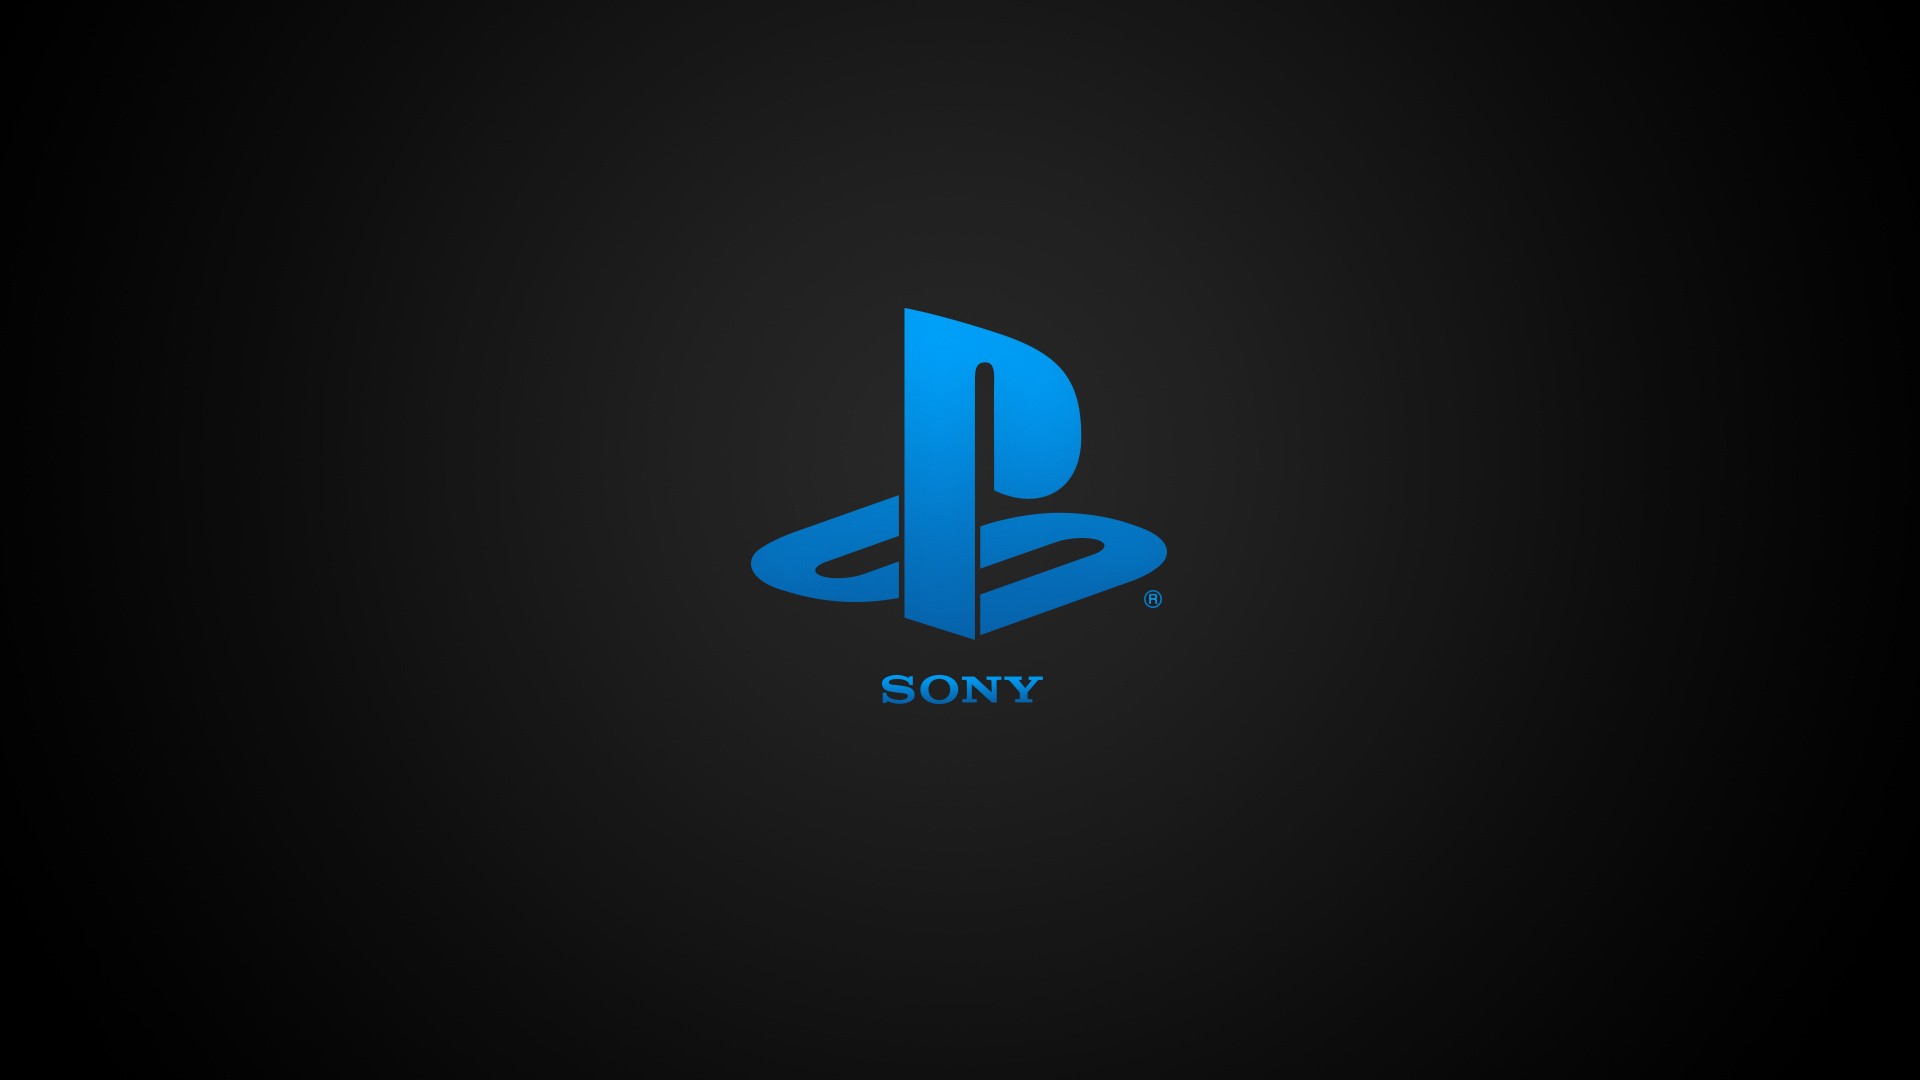 General 1920x1080 PlayStation Sony video games blue logo simple background black background